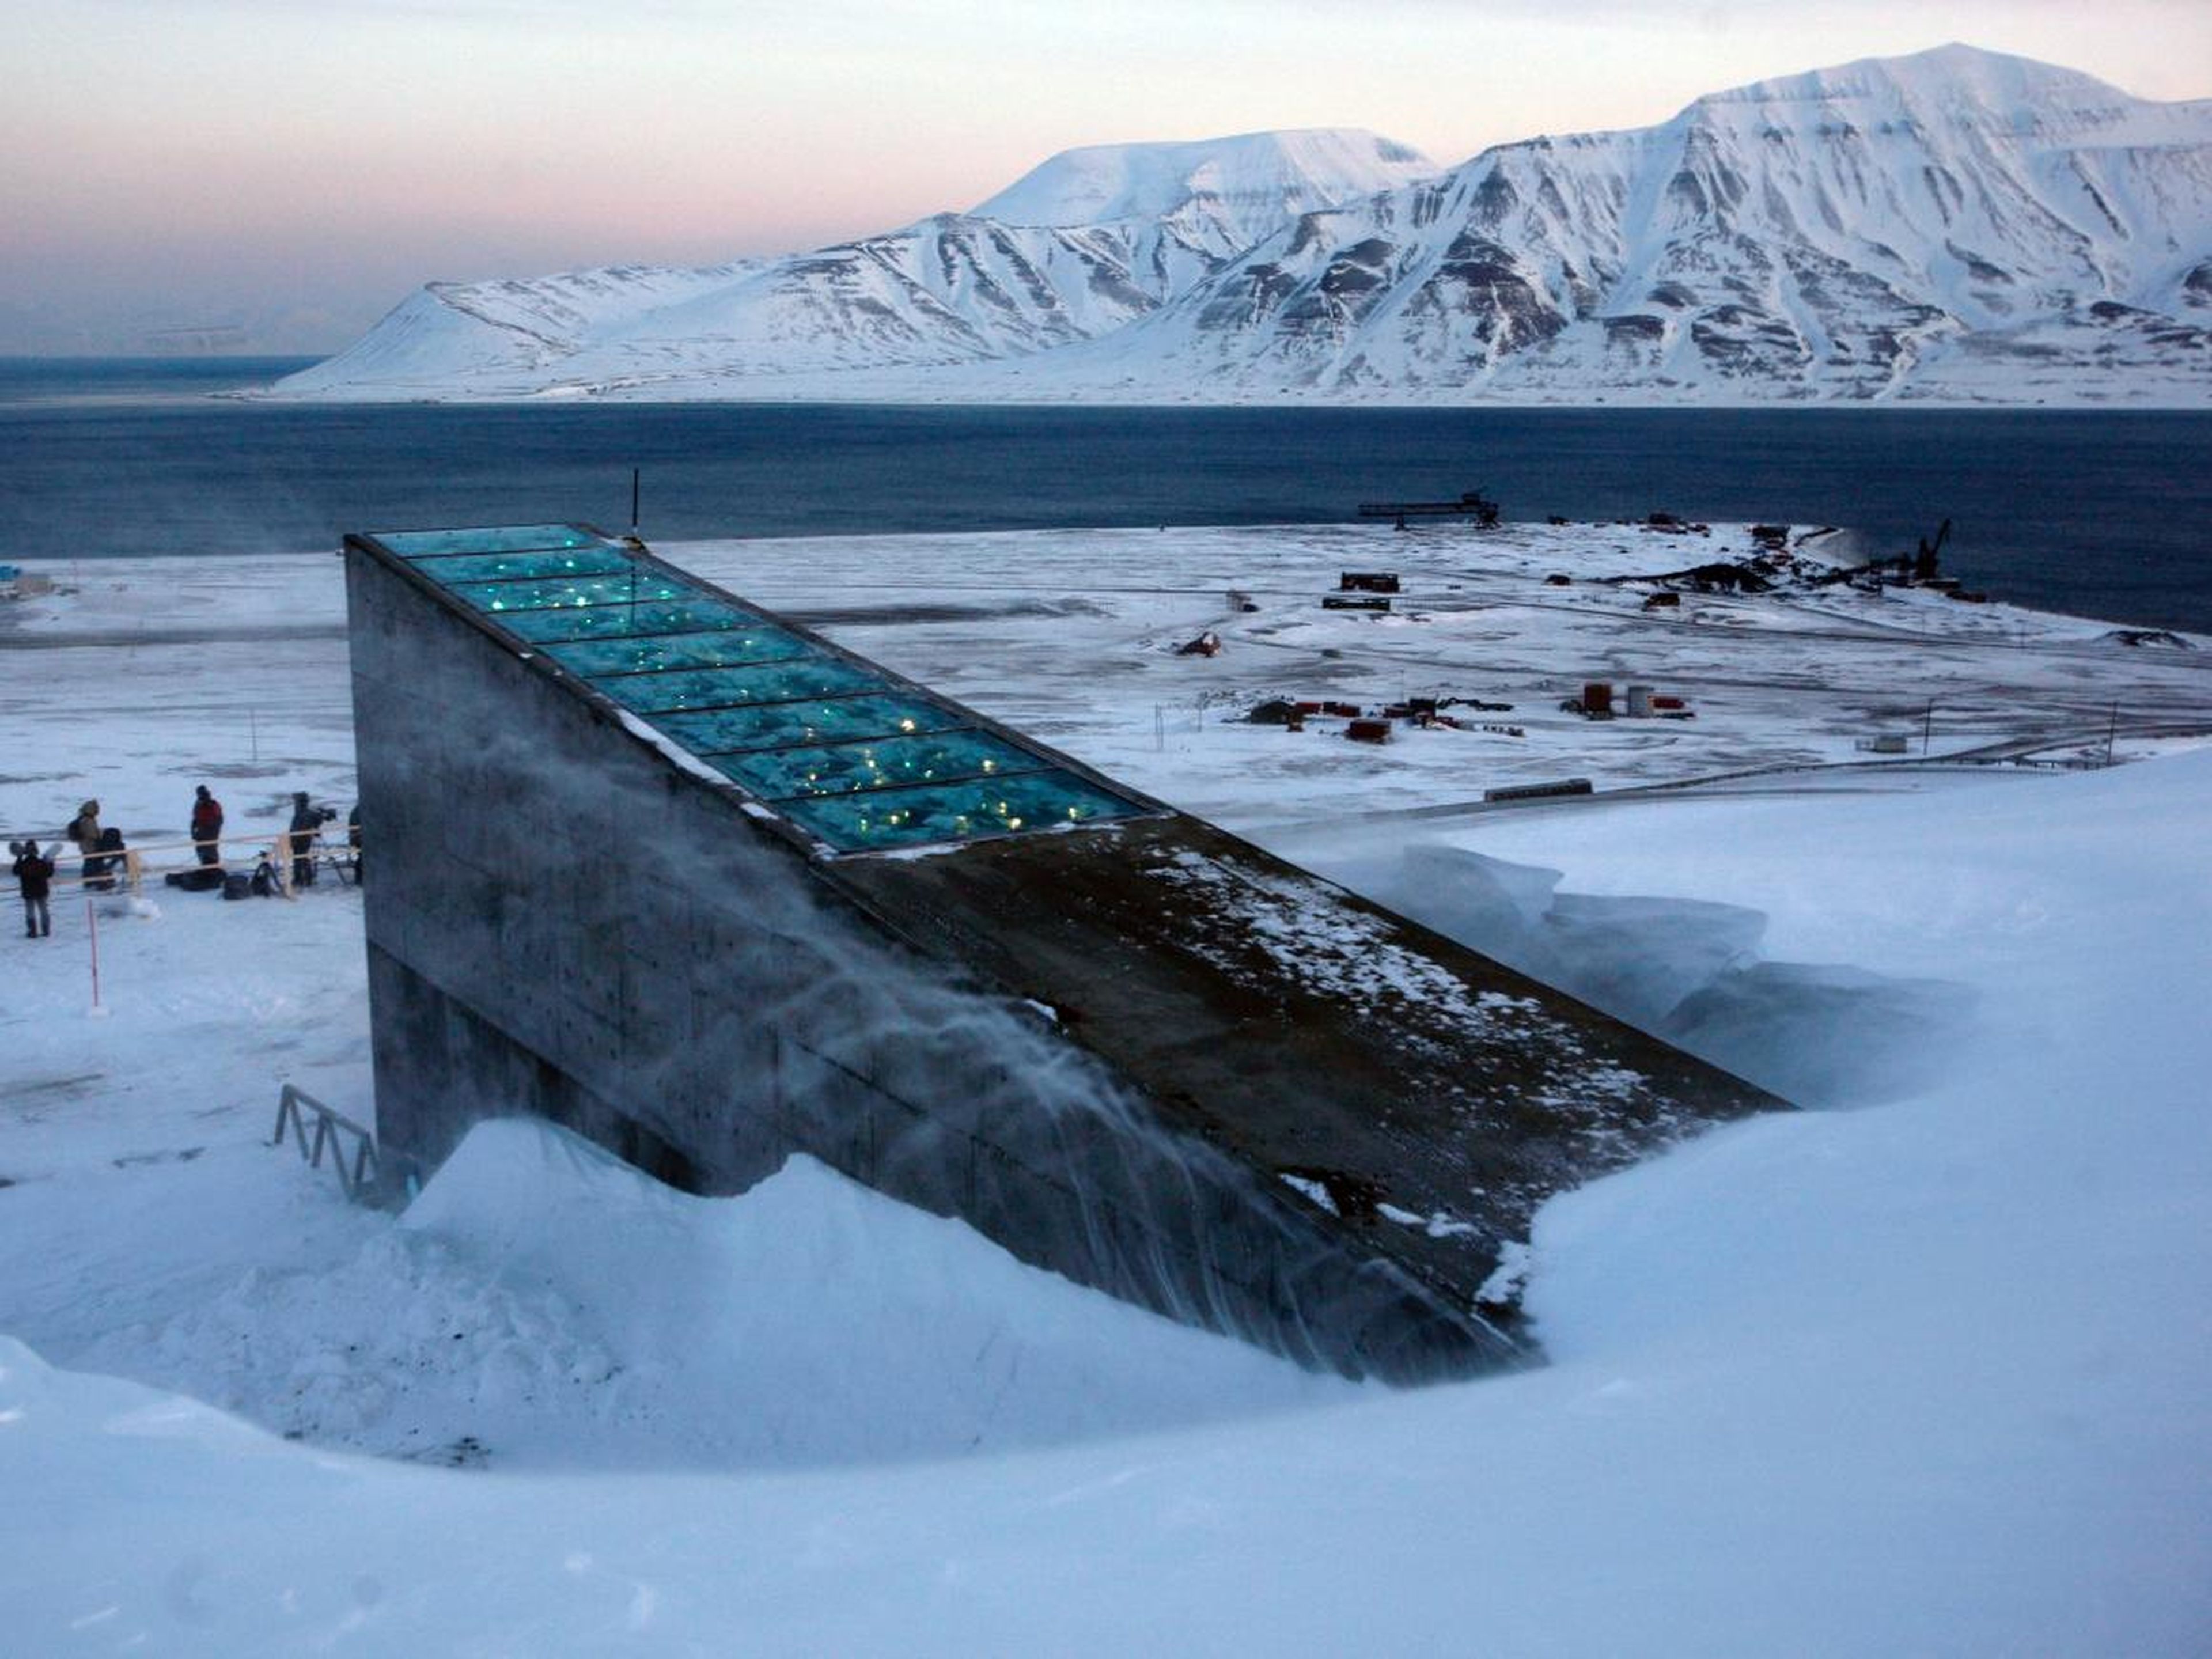 Snow blows off the Svalbard Global Seed Vault at sunrise on, February 26, 2008. The "doomsday" seed vault was built to protect millions of food crops from climate change, wars and natural disasters.